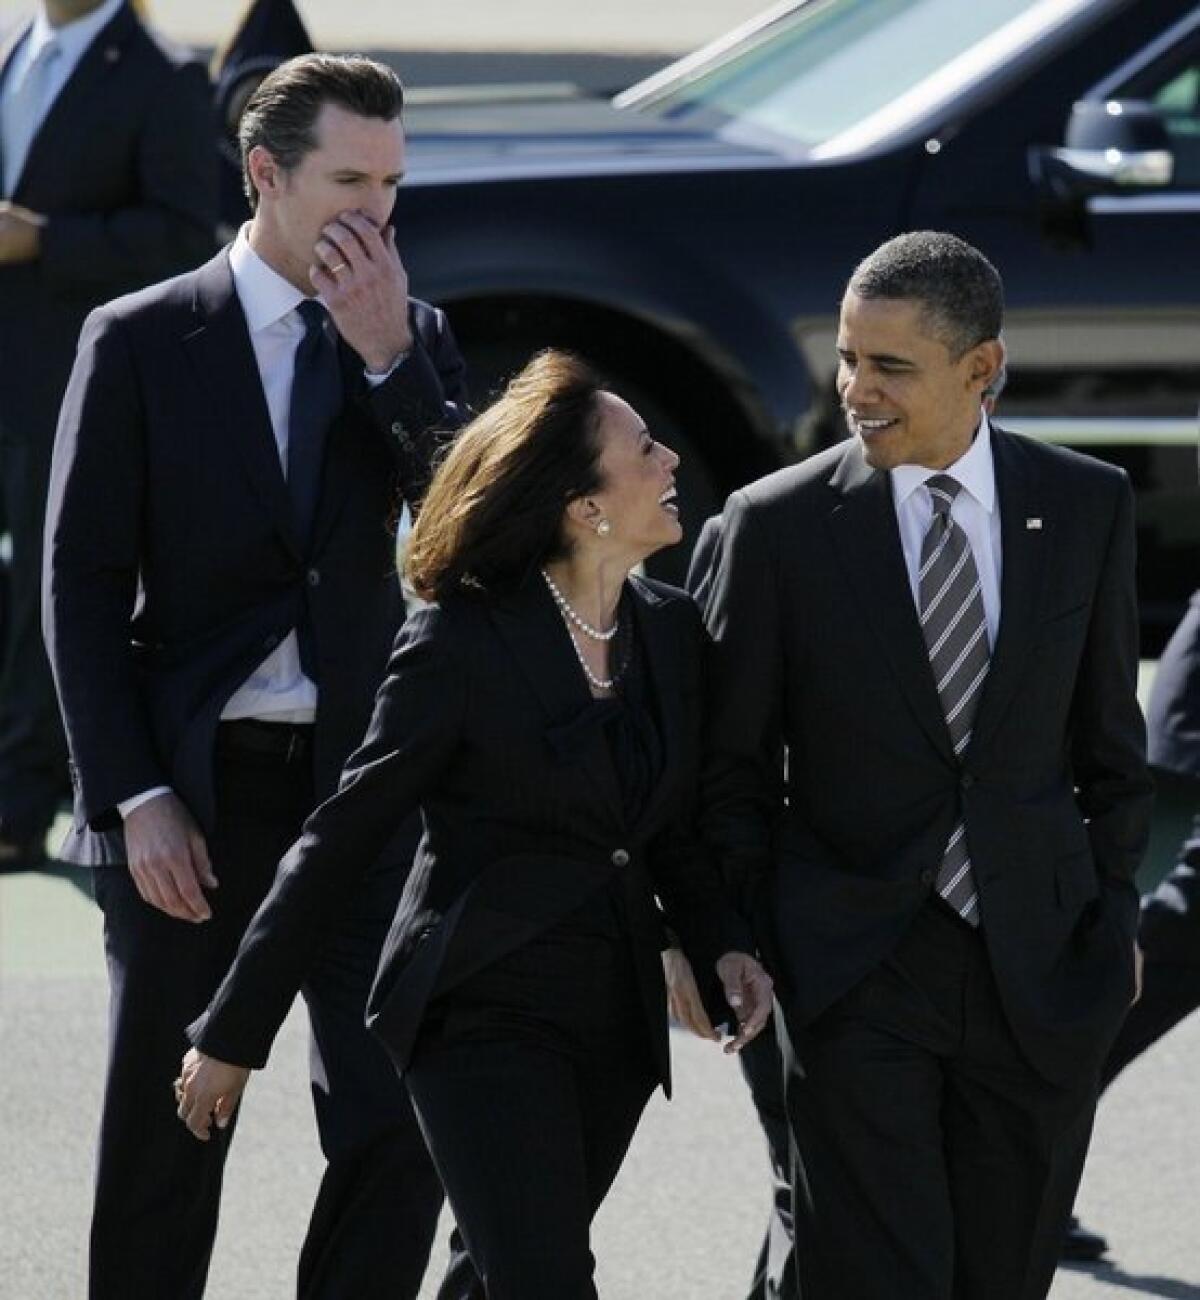 President Obama arrives at San Francisco International Airport and is greeted by California Atty. Gen. Kamala Harris and Lt. Gov. Gavin Newsom. The president was at an Atherton fundraiser when he joked about Harris as the nation's "best-looking" attorney general.